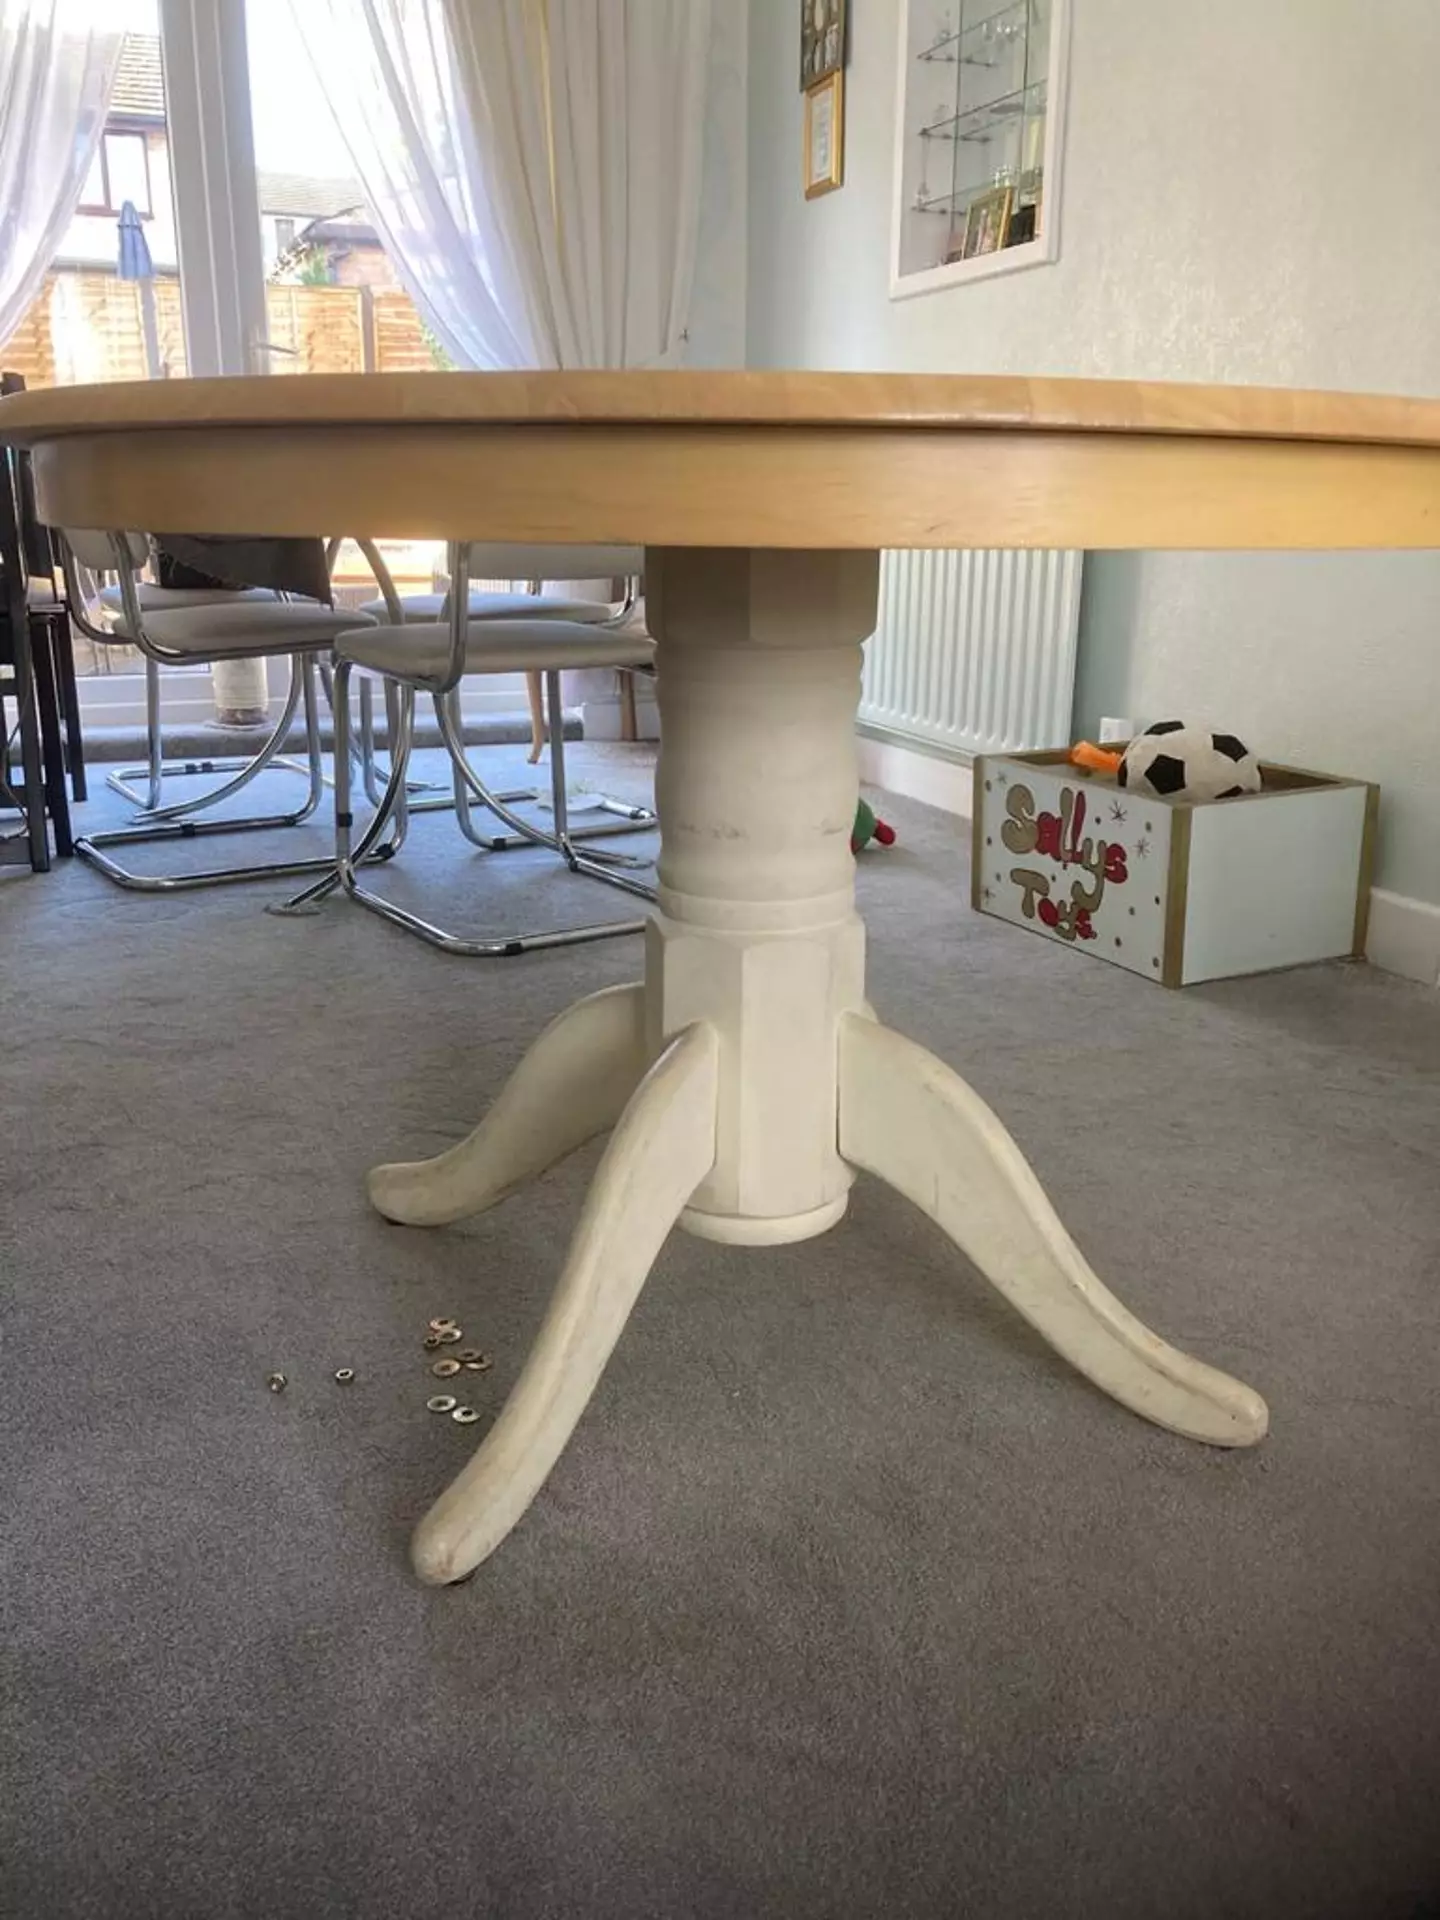 Table before the transformation.